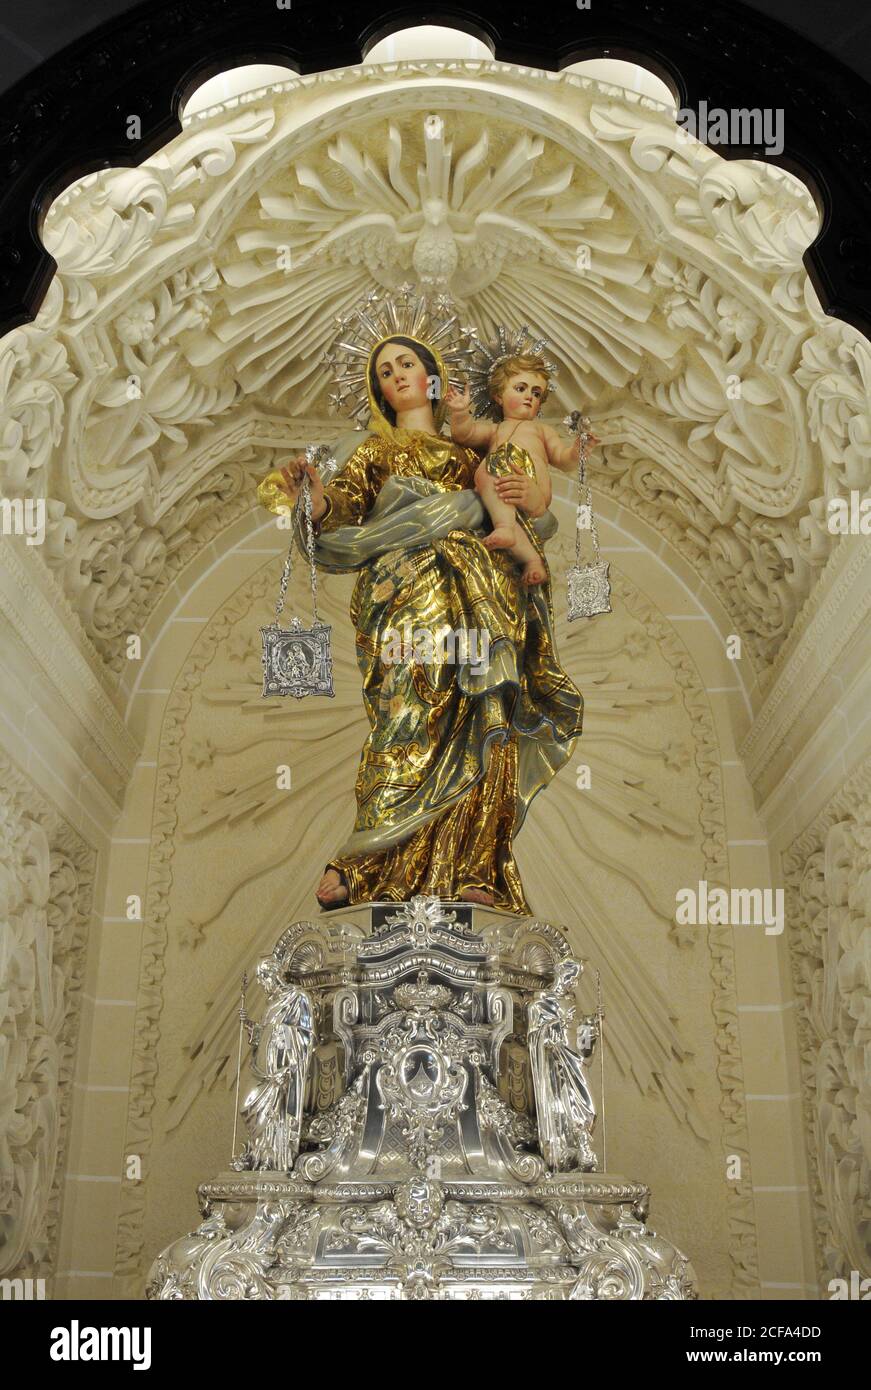 Statue of the Madonna and Child inside the Basilica of Our Lady of Mount Carmel in Valletta, Malta. Stock Photo